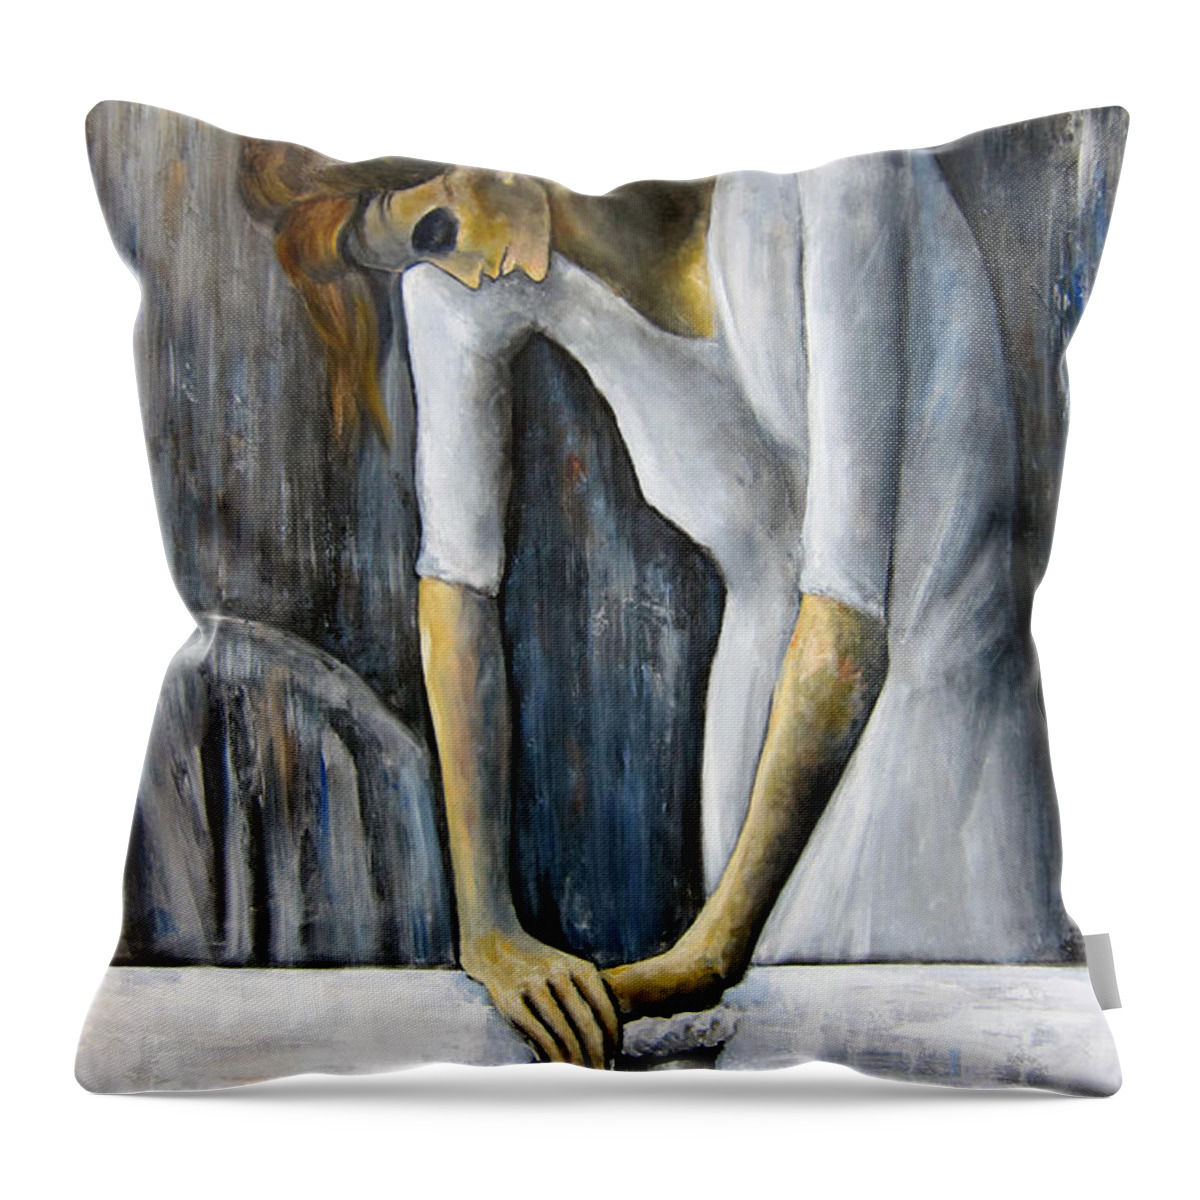 Picasso Paintings Throw Pillow featuring the painting Picasso's Woman Ironing by Leonardo Ruggieri